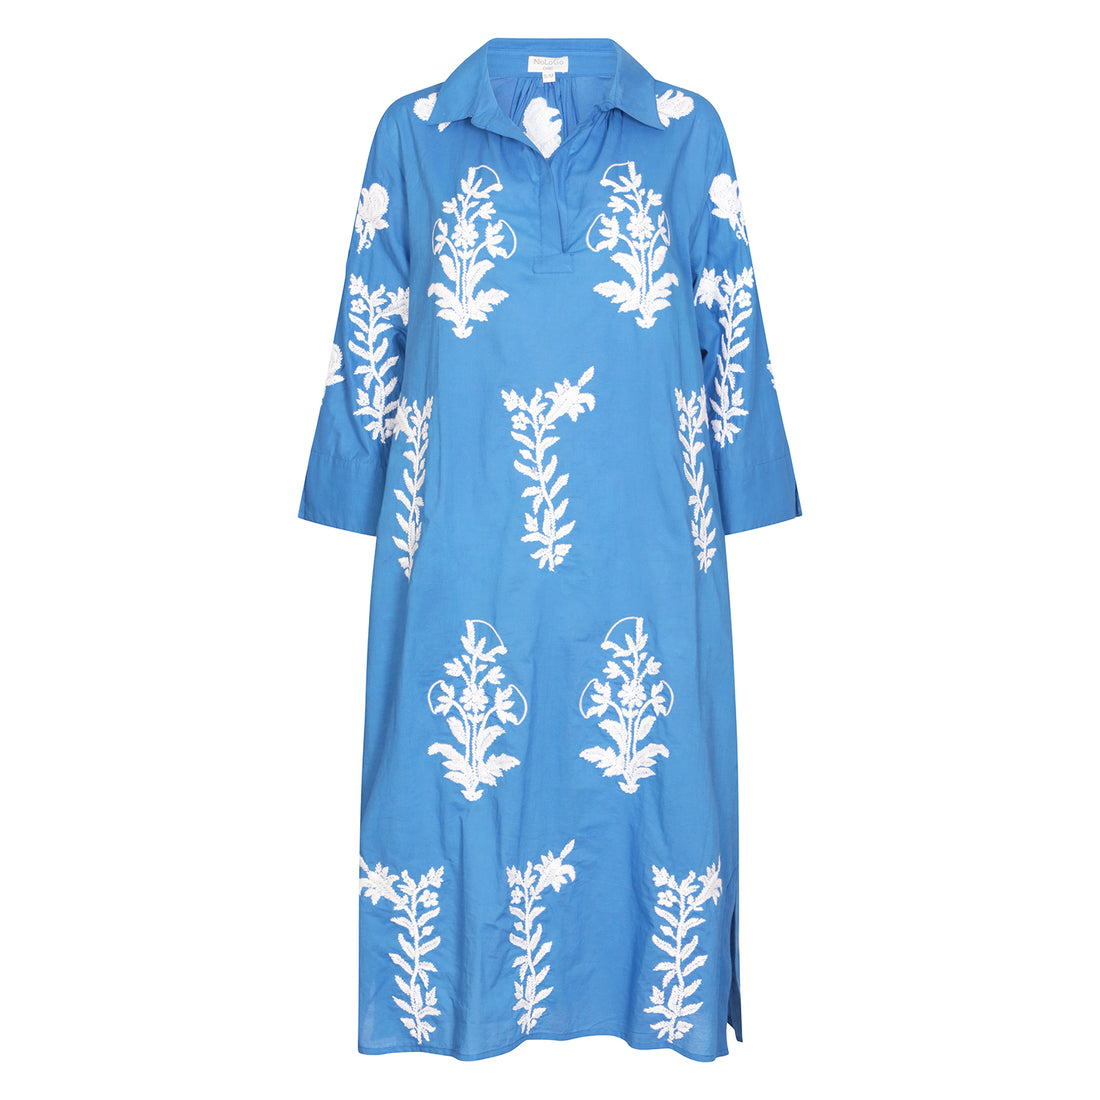 Long Tourist Dress Blue with White Embroidery Cotton Blue